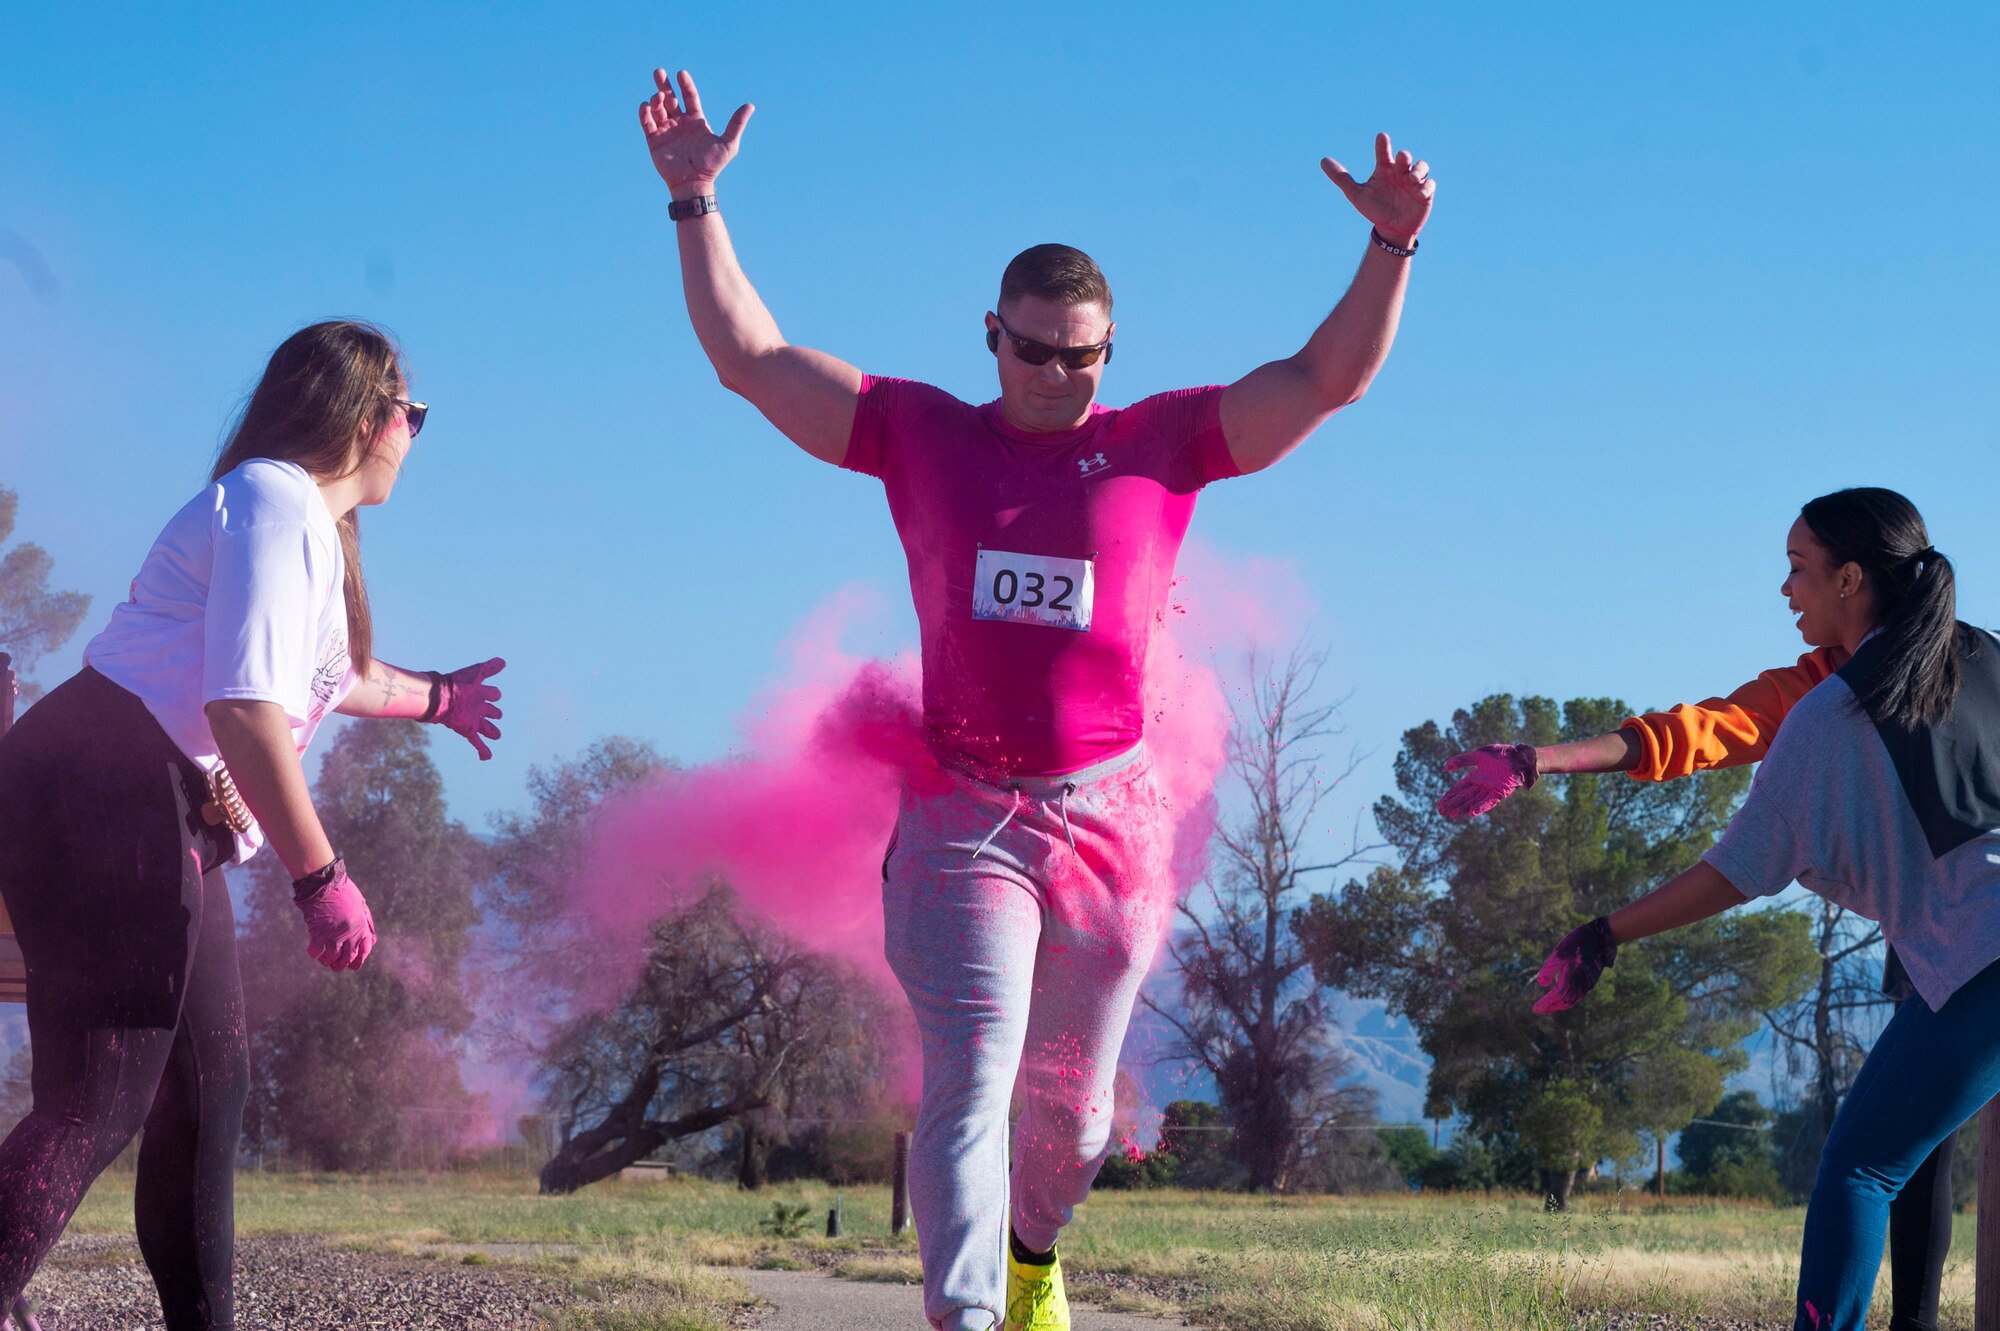 Pictured above is a man running through a cloud of pink smoke.